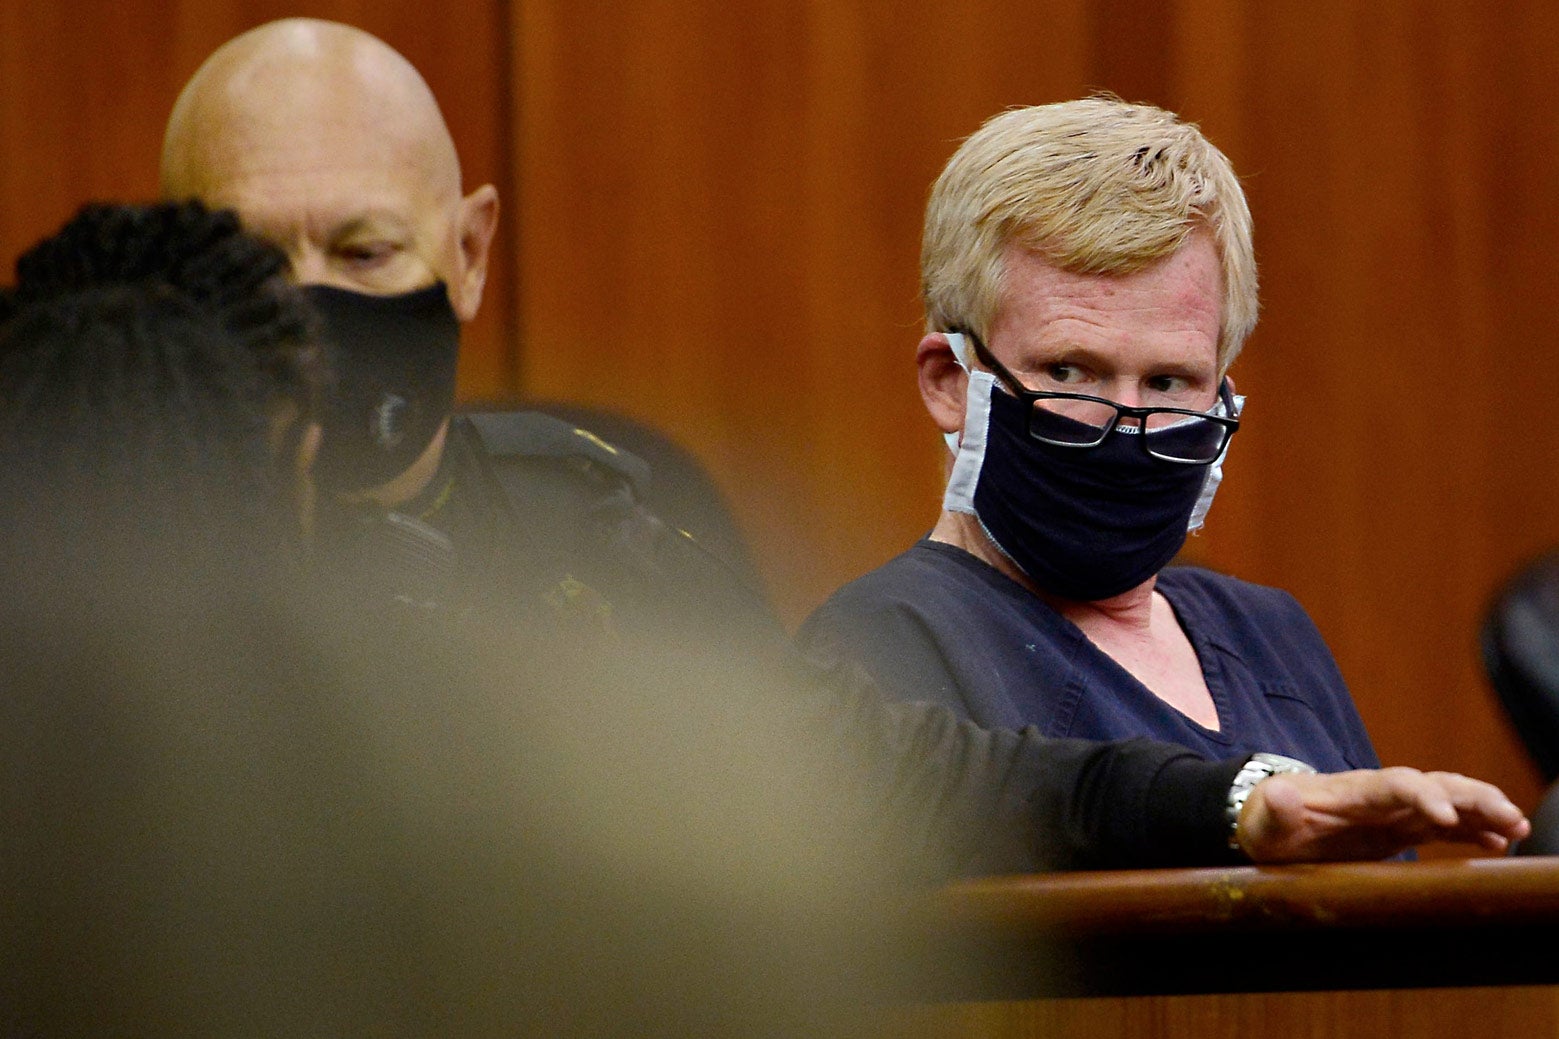 The red-haired Murdaugh, wearing a blue prison jumpsuit and glasses over a black COVID mask, looks to his right while seated in a courtroom.